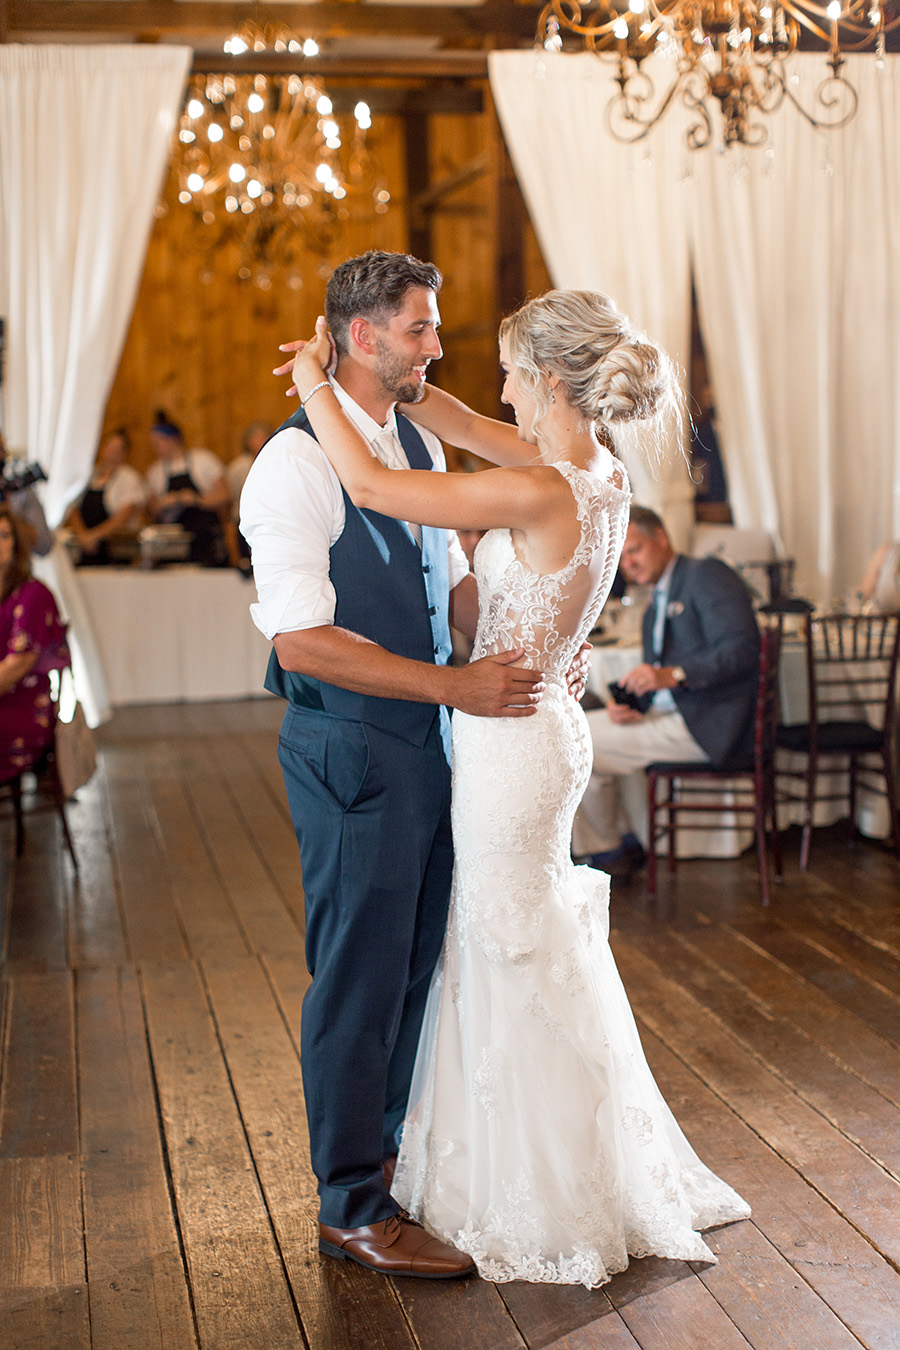 first dance as husband and wife in the barn at melhorn manor